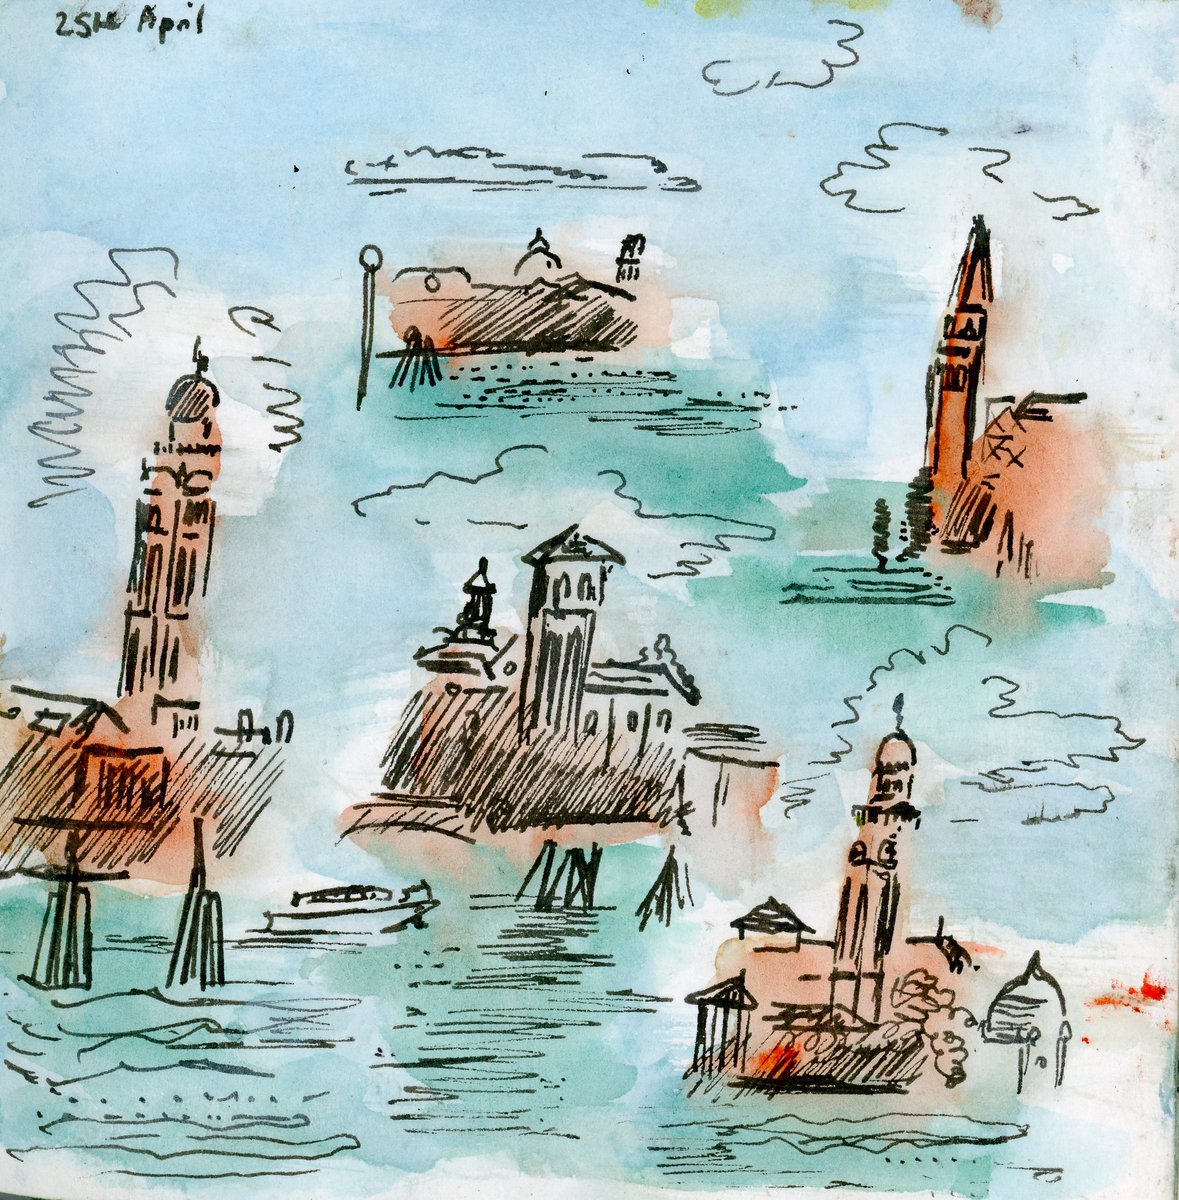 The first reference point was my sketches of Venice from 2015 (back when travelling was a thing). The picture on the wider reading card has a very very tiny self-portrait of me sketching the view from the Doge’s palace.